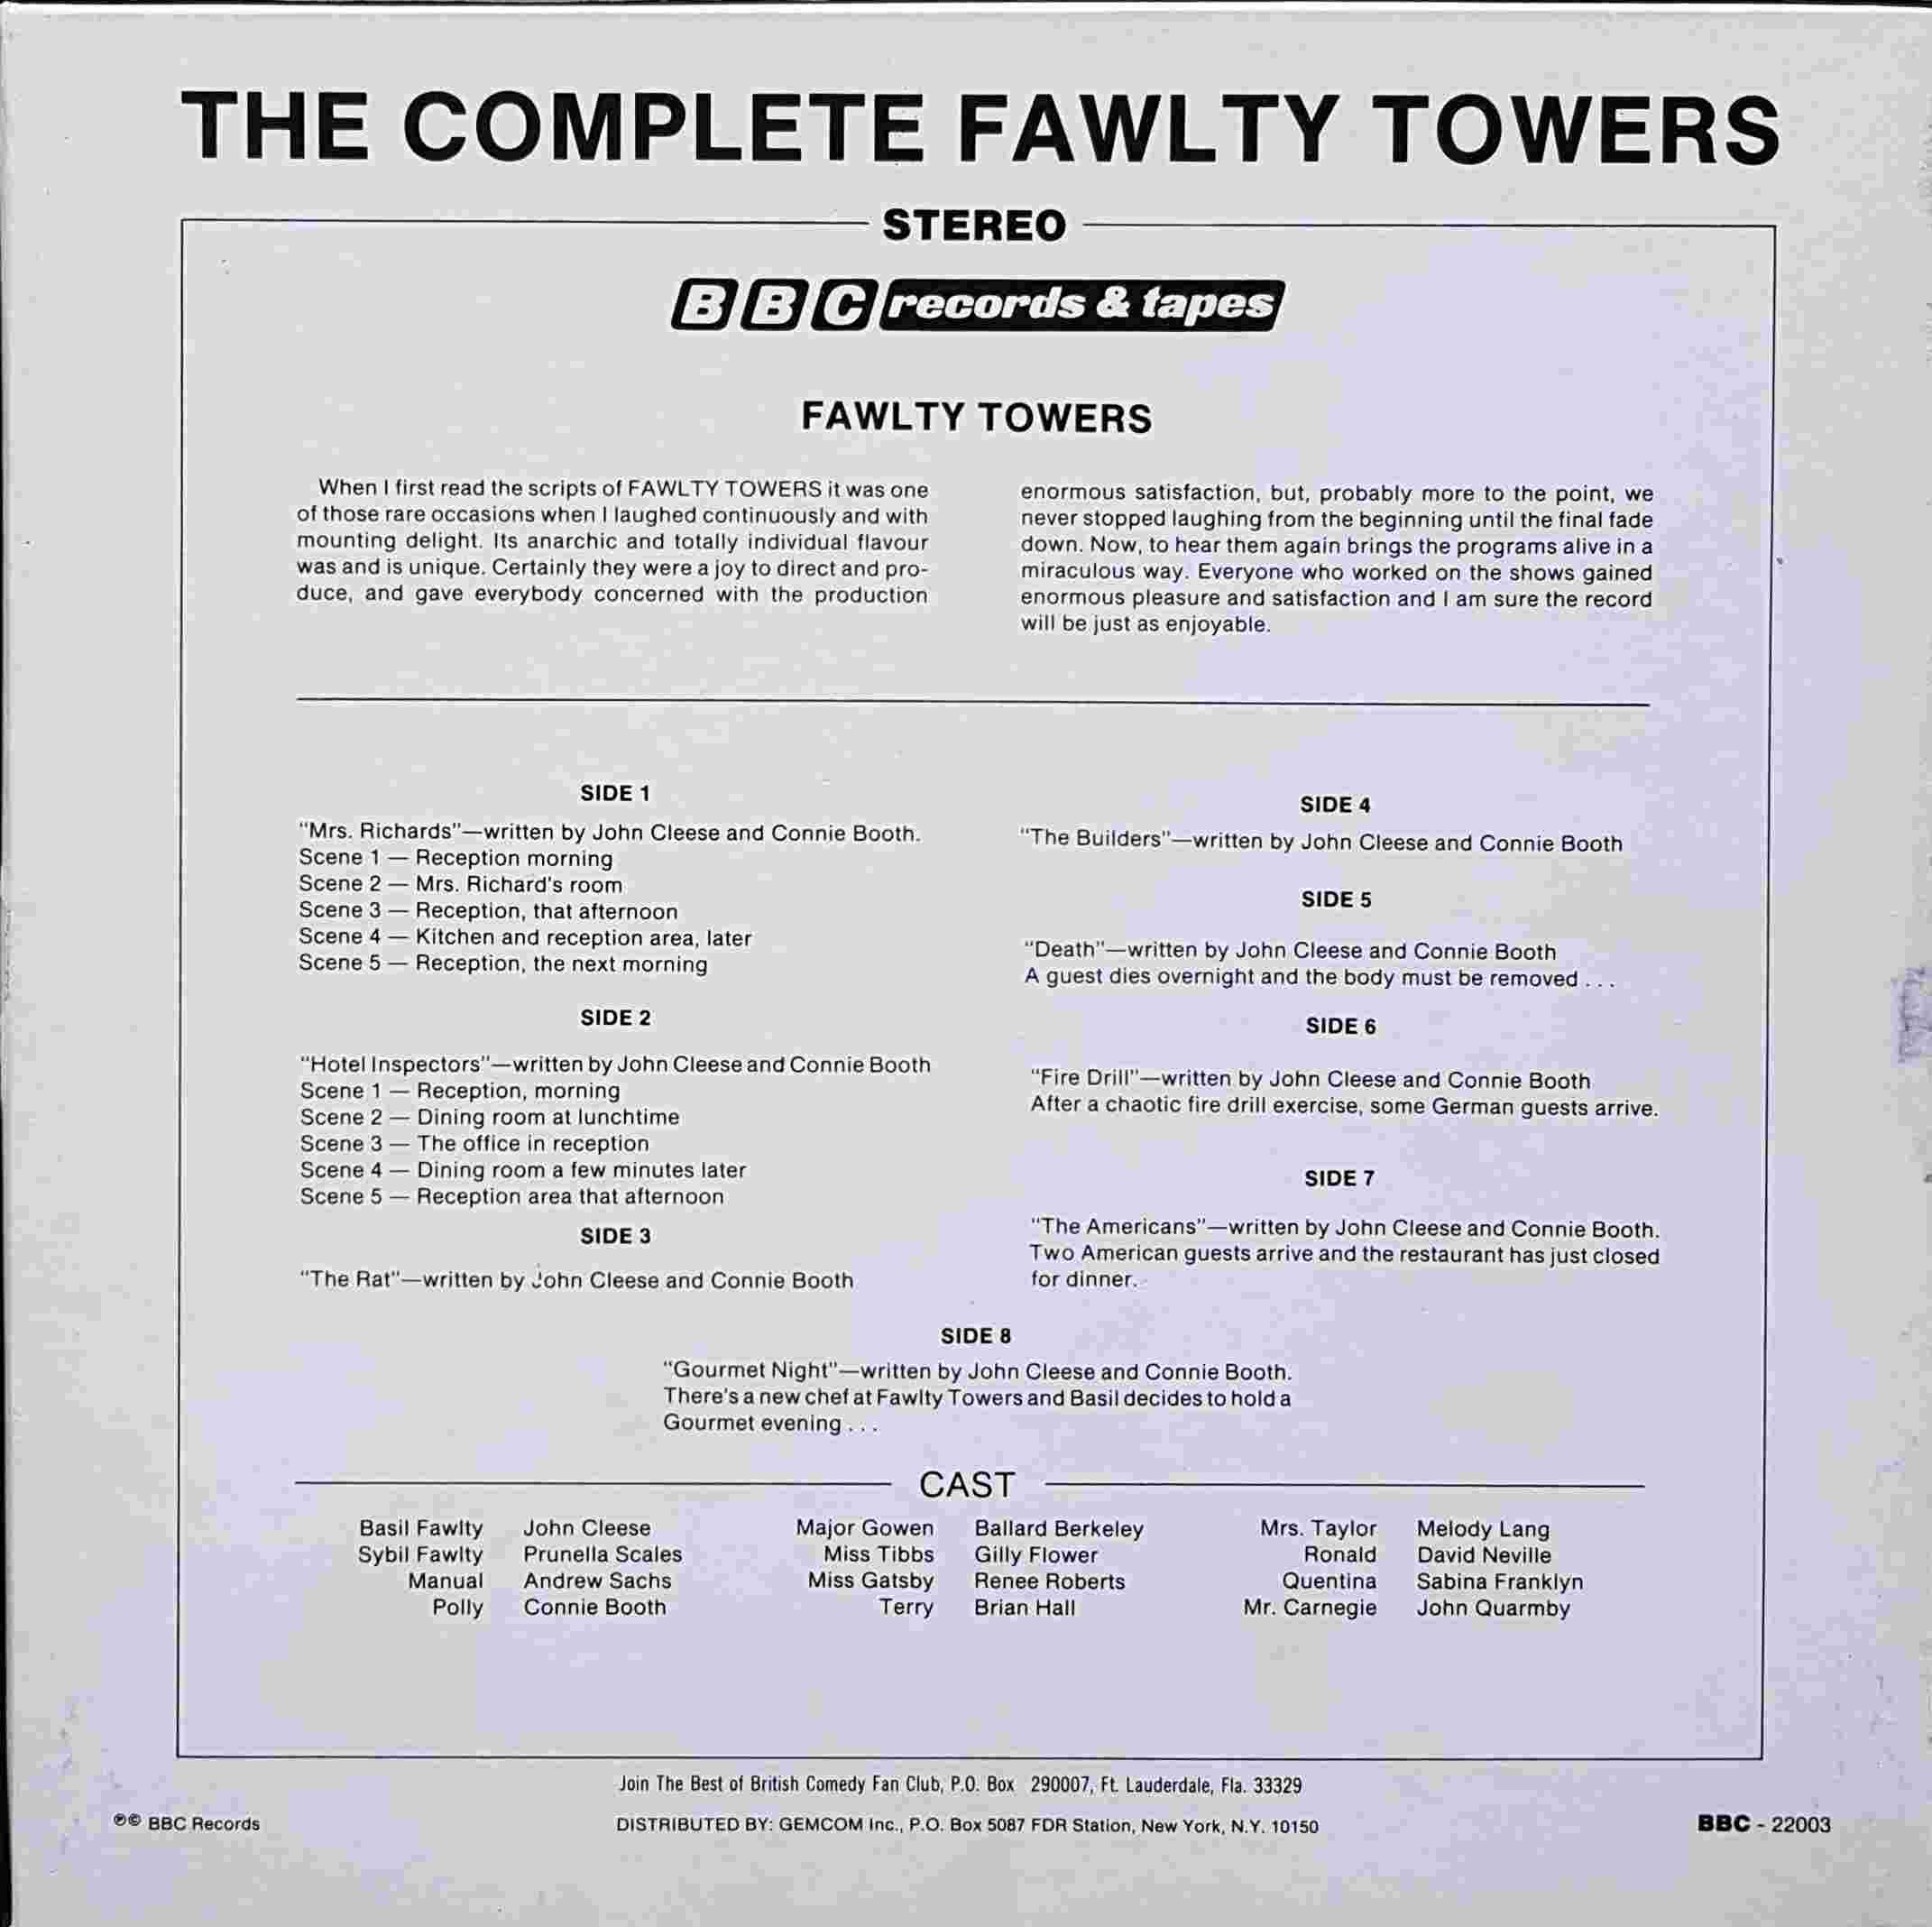 Picture of BBC - 22003 The Complete Fawlty Towers Record Collection by artist John Cleese / Connie Booth from the BBC records and Tapes library